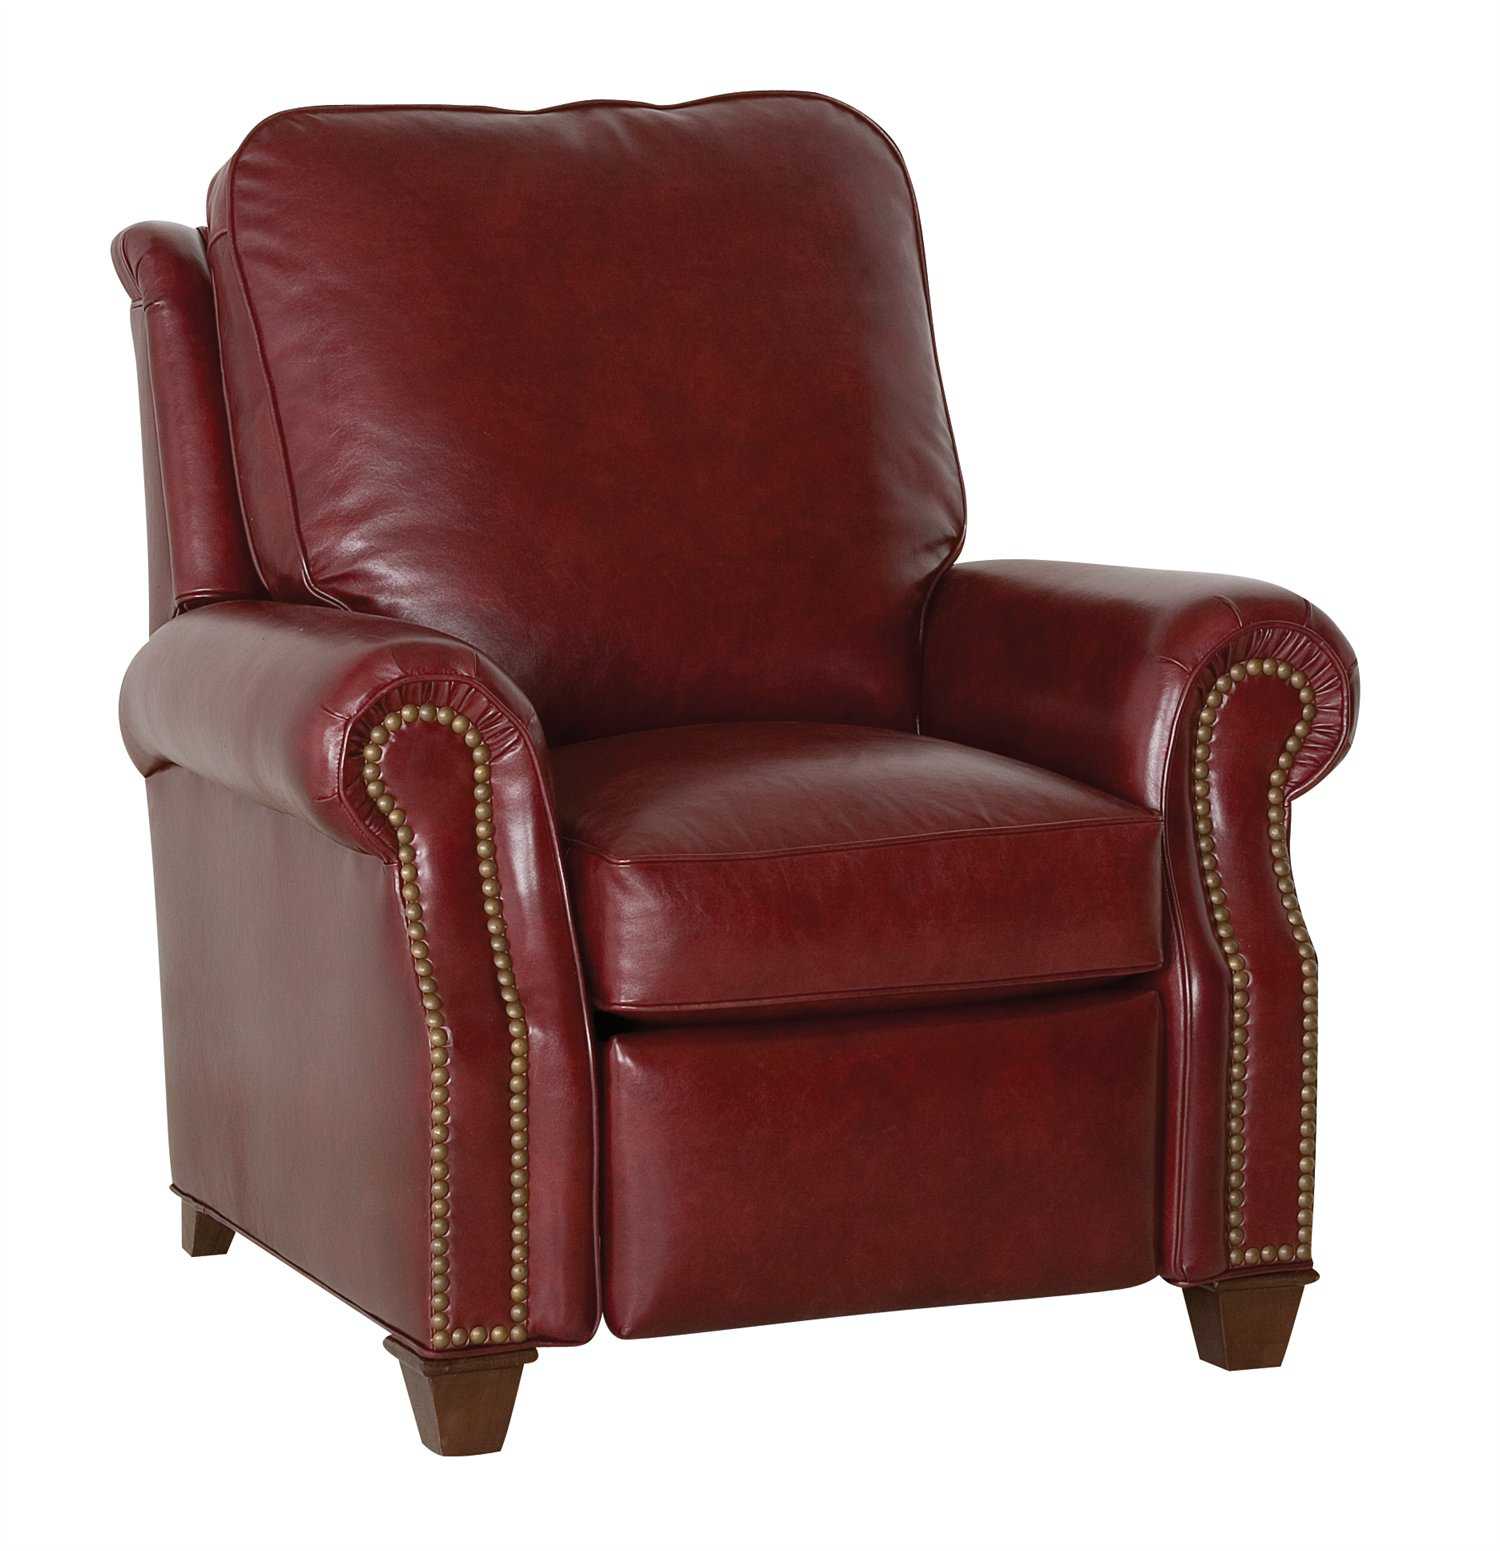 Classic Leather Portsmouth Low Leg Recliner Cl8026llr